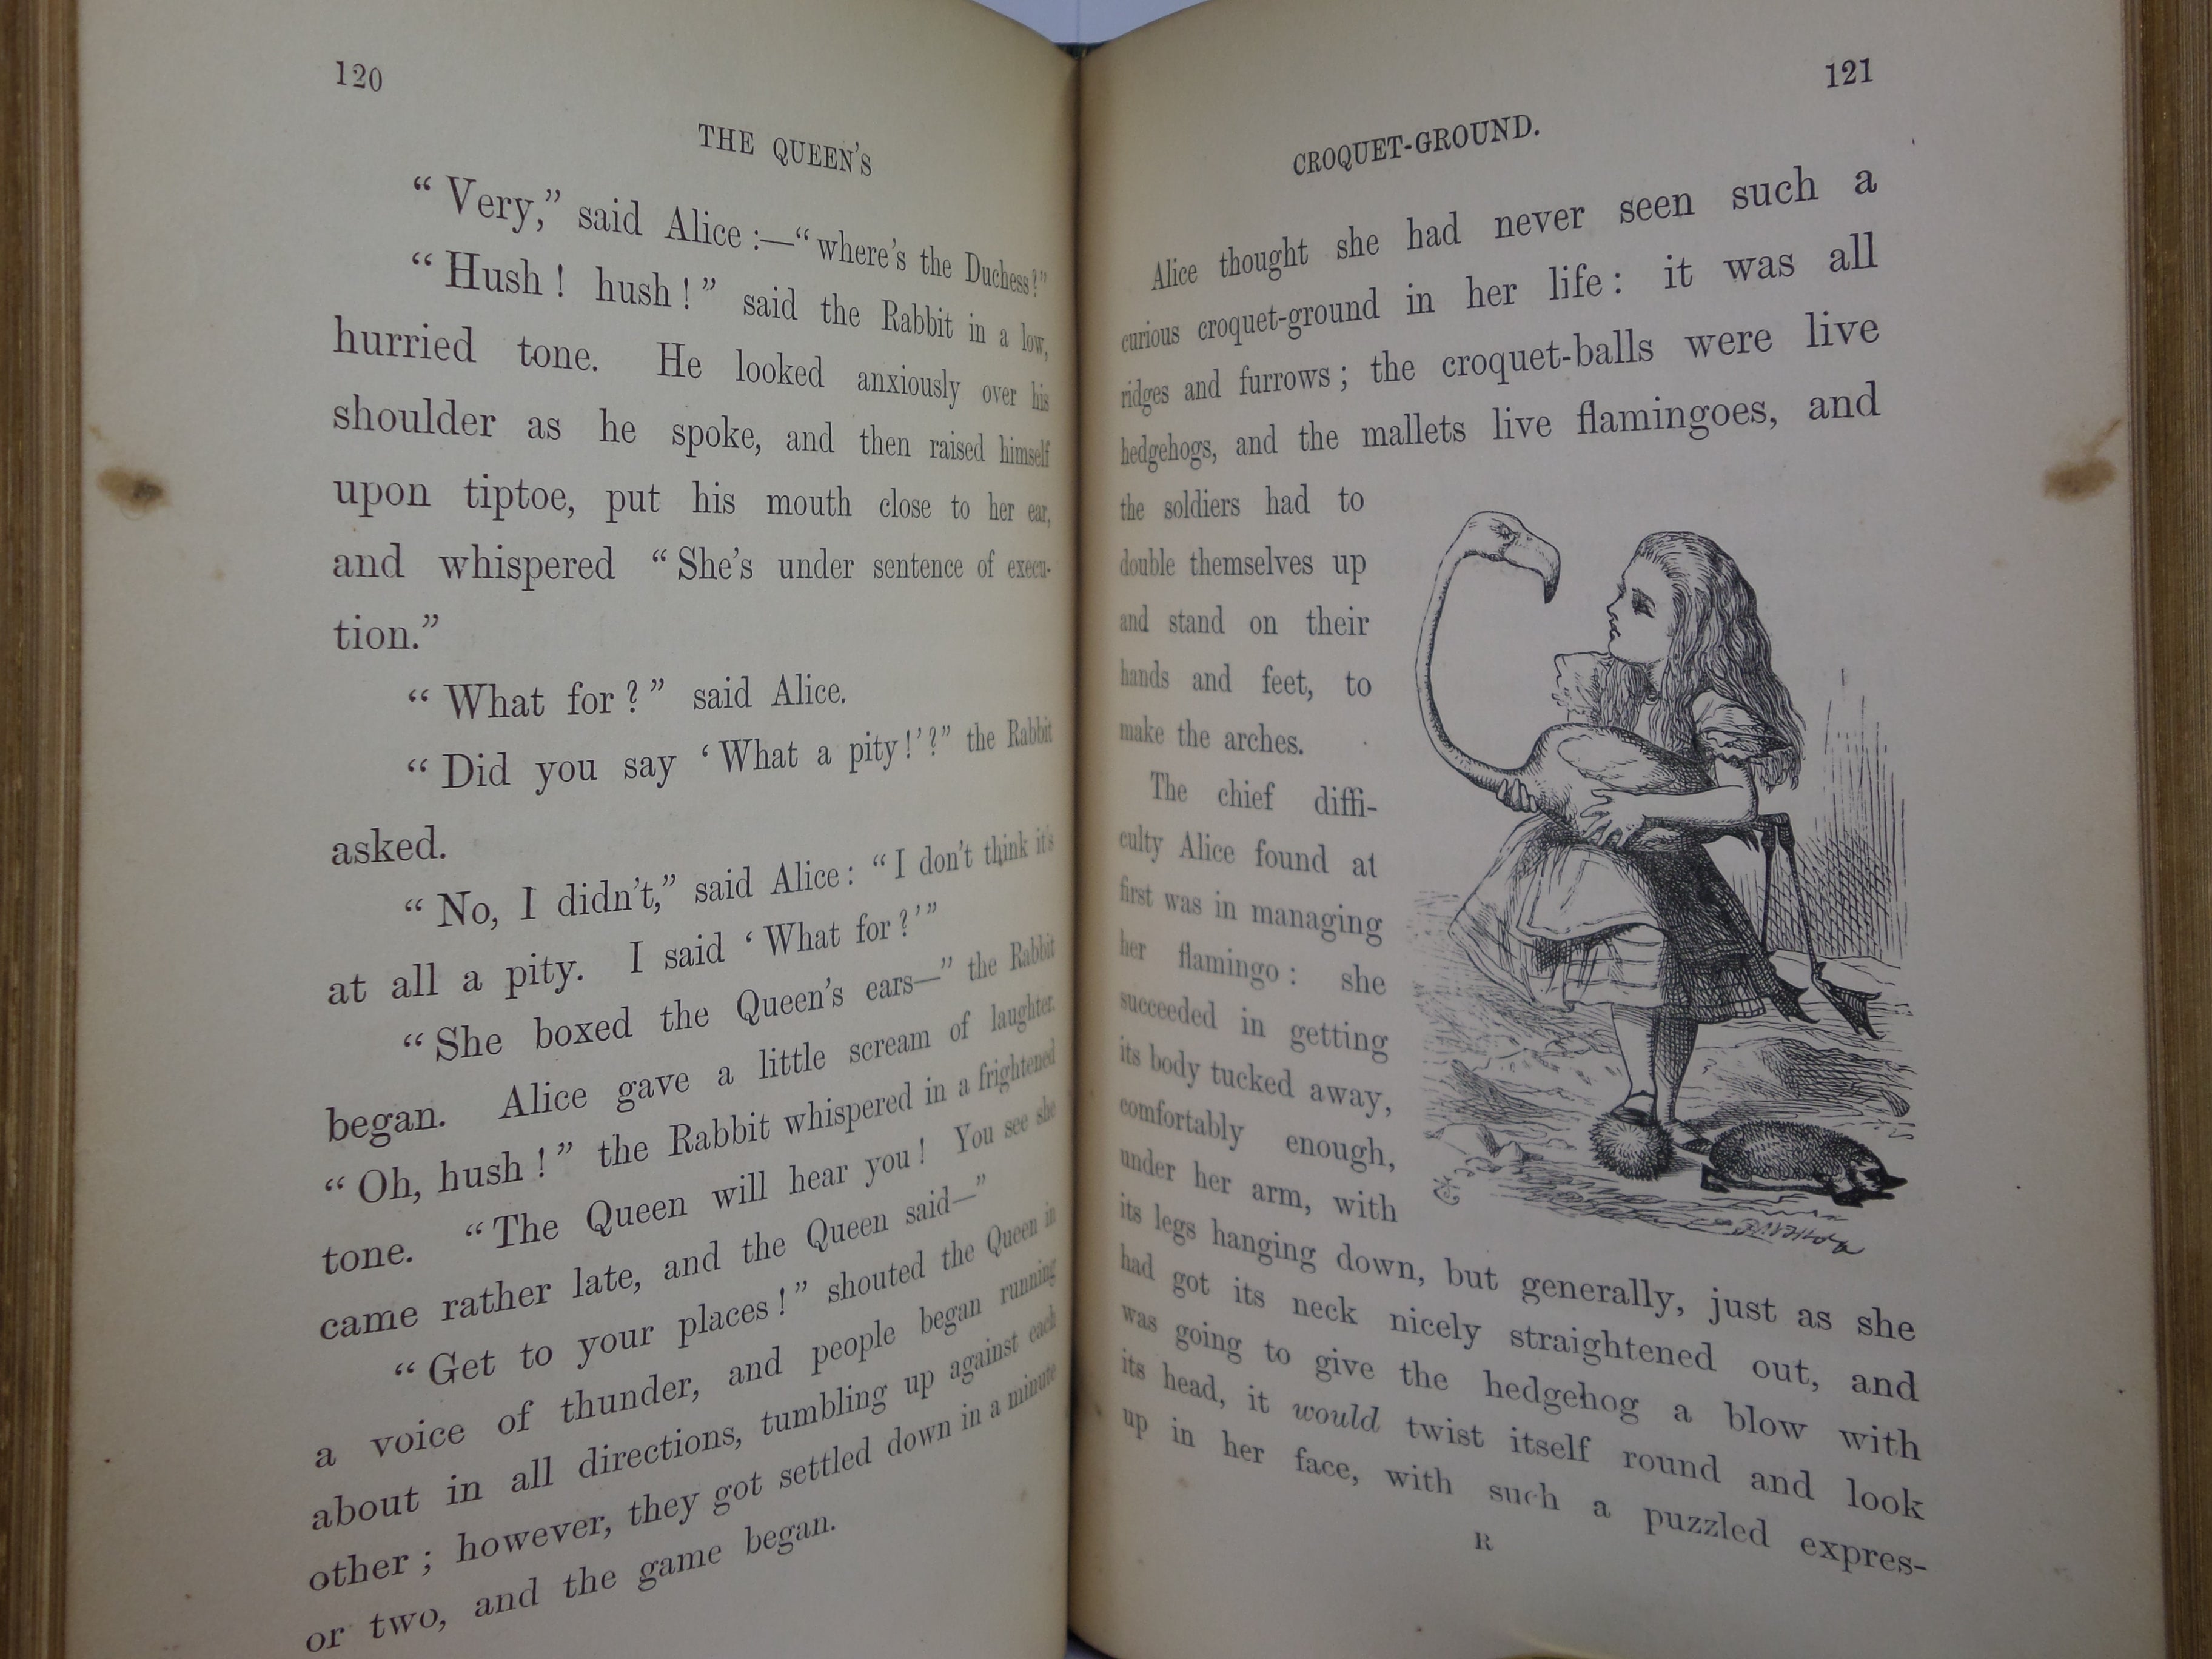 ALICE'S ADVENTURES IN WONDERLAND BY LEWIS CARROLL 1869 SIXTH EDITION FINELY BOUND BY ZAEHNSDORF